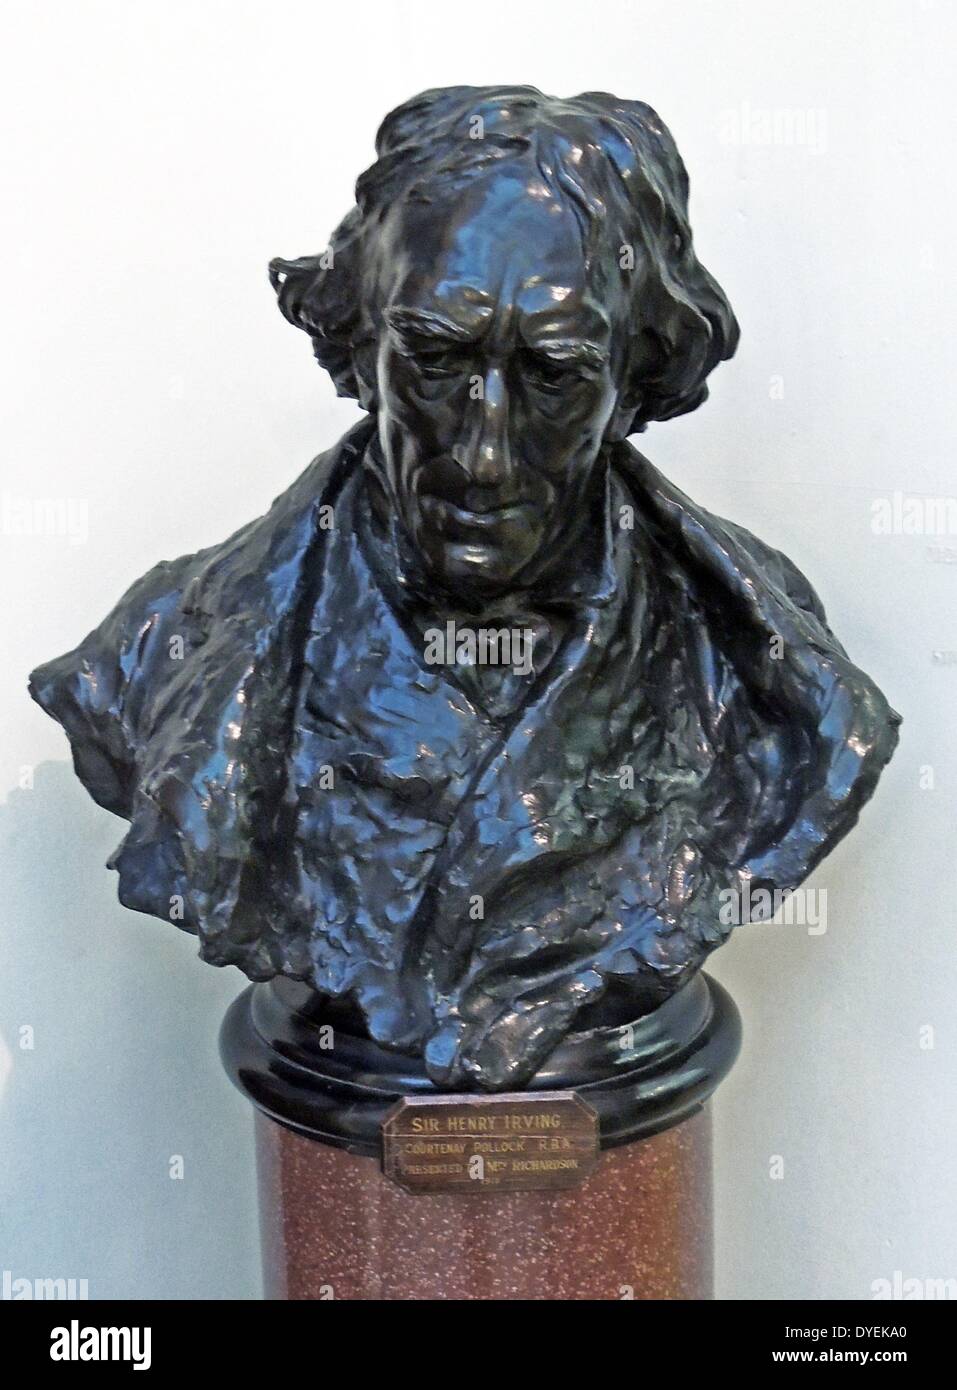 Sir Henry Irving (6 February 1838 – 13 October 1905), born John Henry Brodribb, was an English stage actor in the Victorian era. Bust by Courtney pollock 1918 Stock Photo